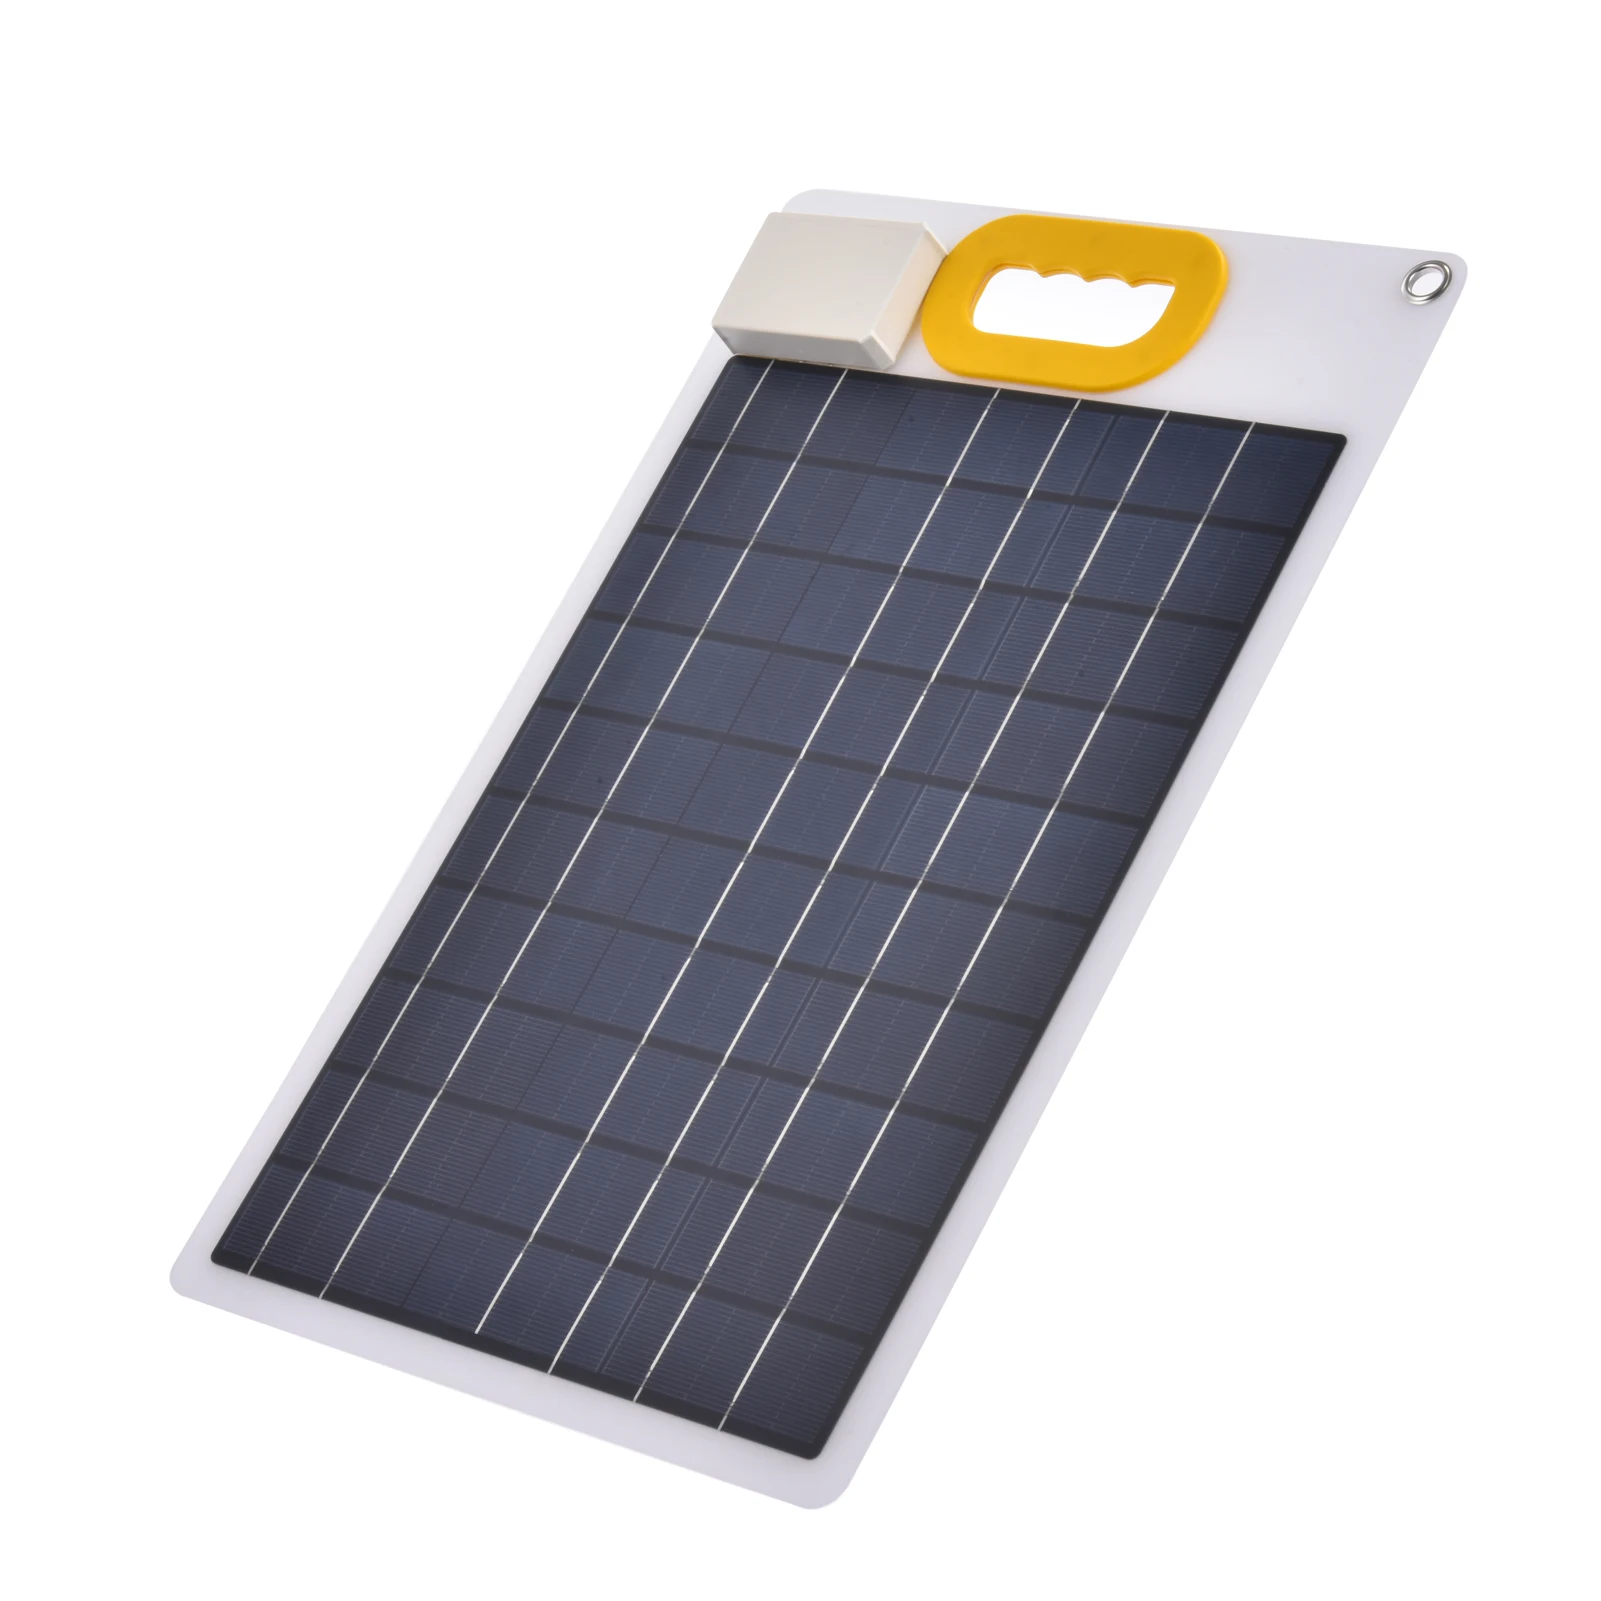 

30W Solar Cells Charger High-Efficiency USB Output Devices Solar Cells Smart With 2 USB Ports & 1 USB C For Smart Device Travel